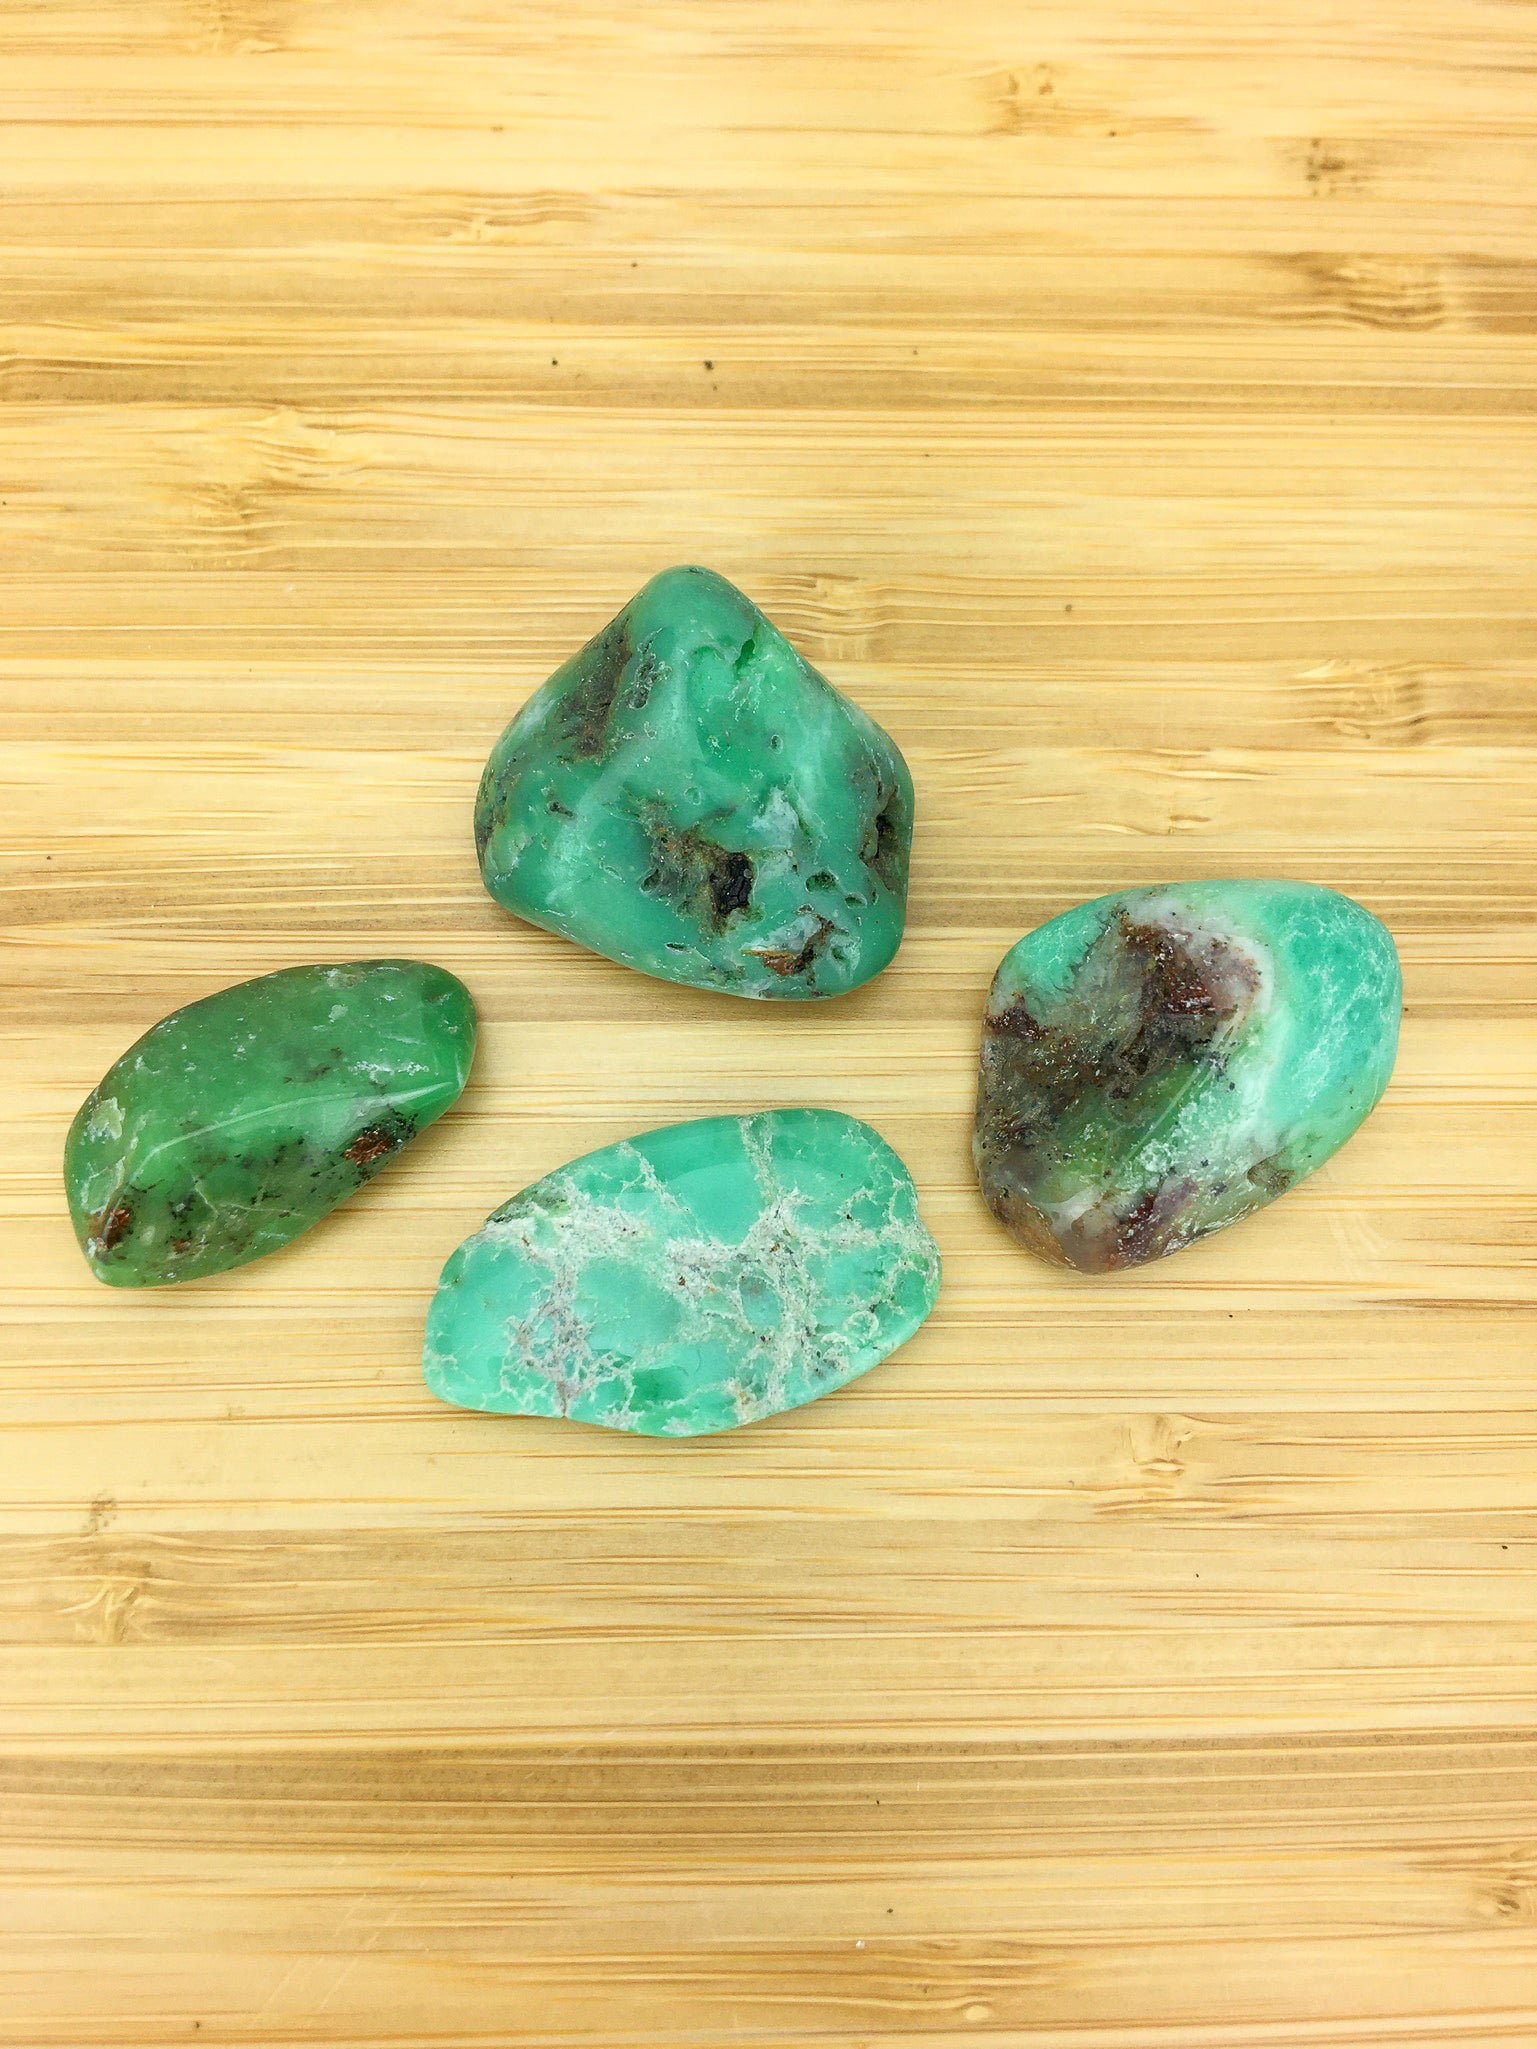 four pieces of apples green chrysoprase on a light wood grained surface